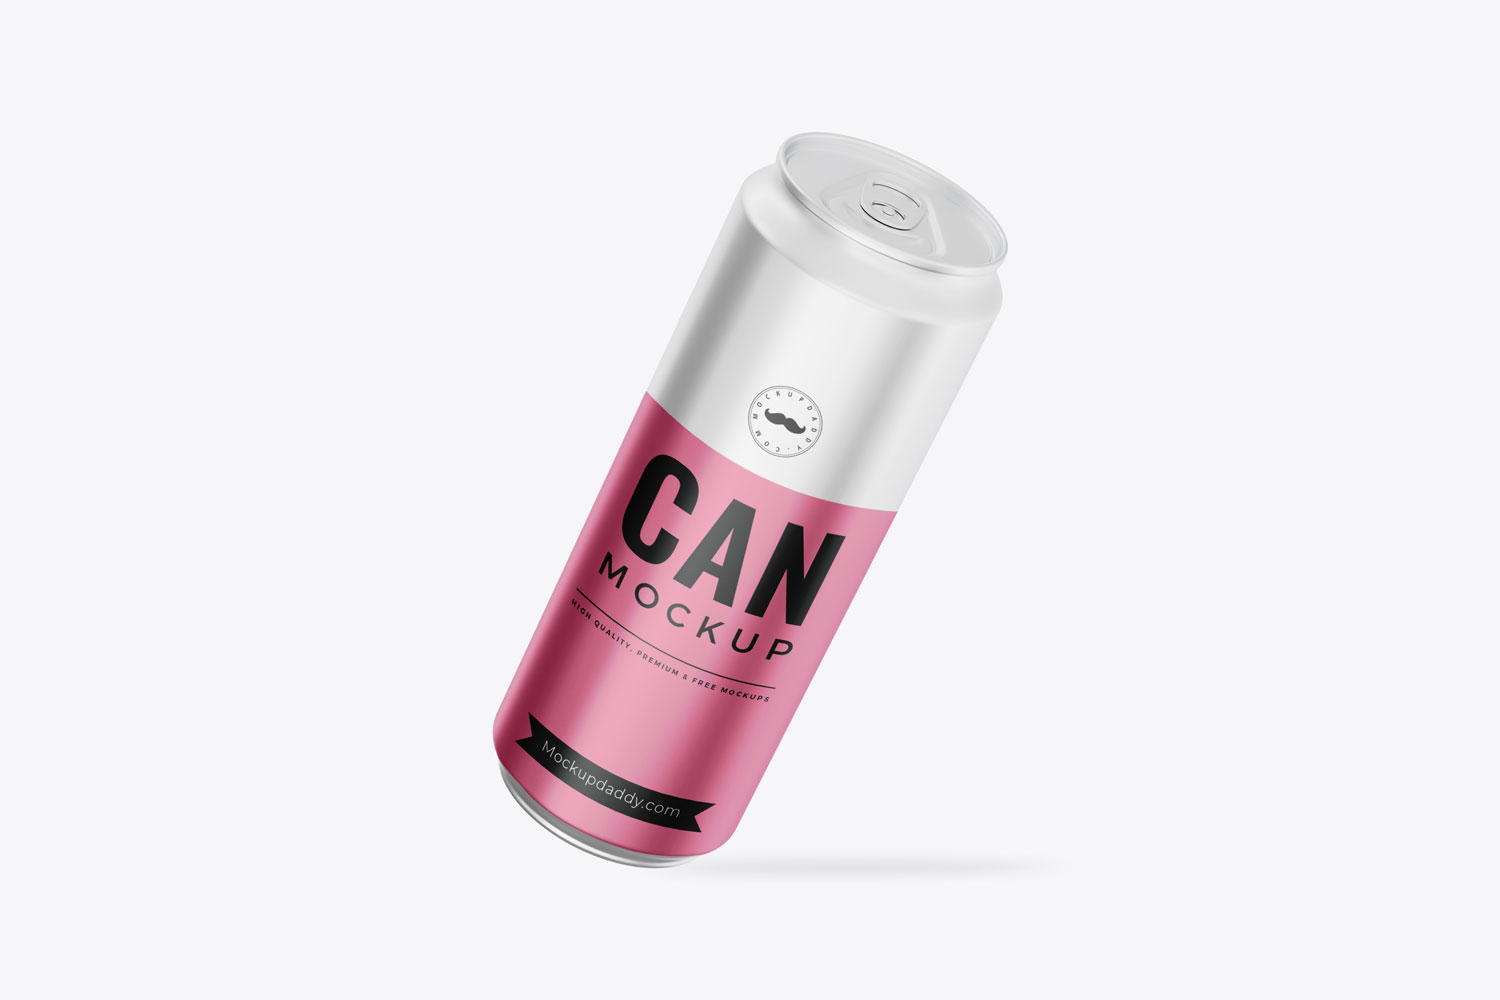 Floating Soda Can Mockup with pink label on white background.